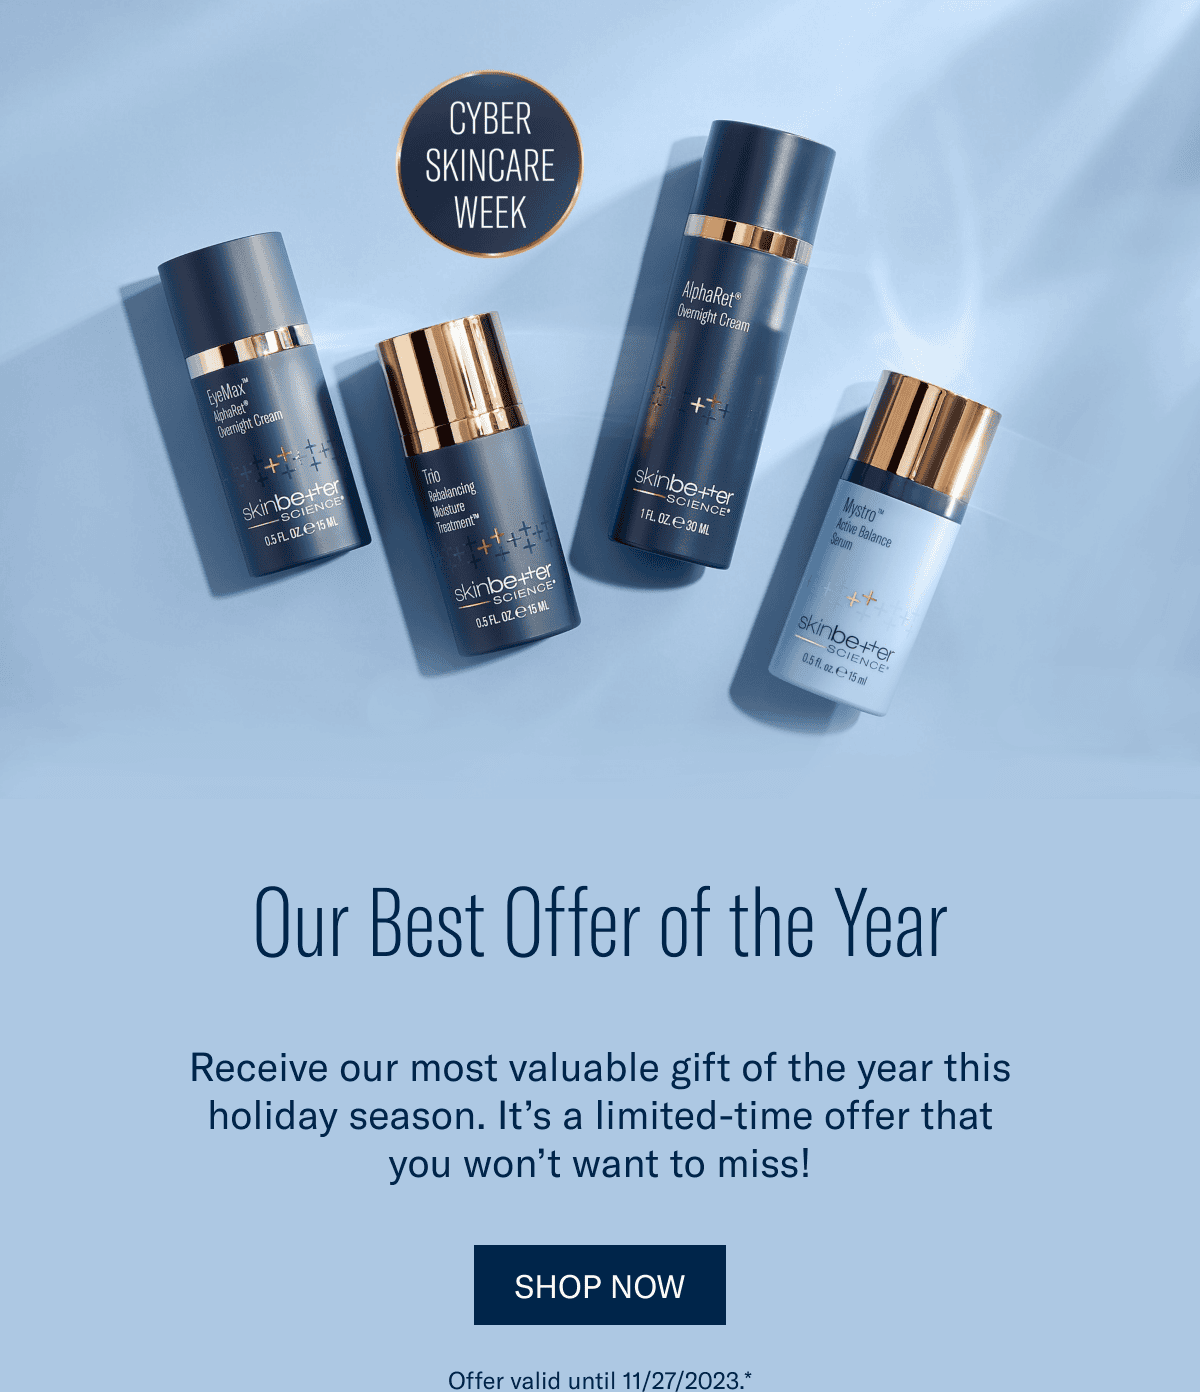 Our Best Offer of the Year